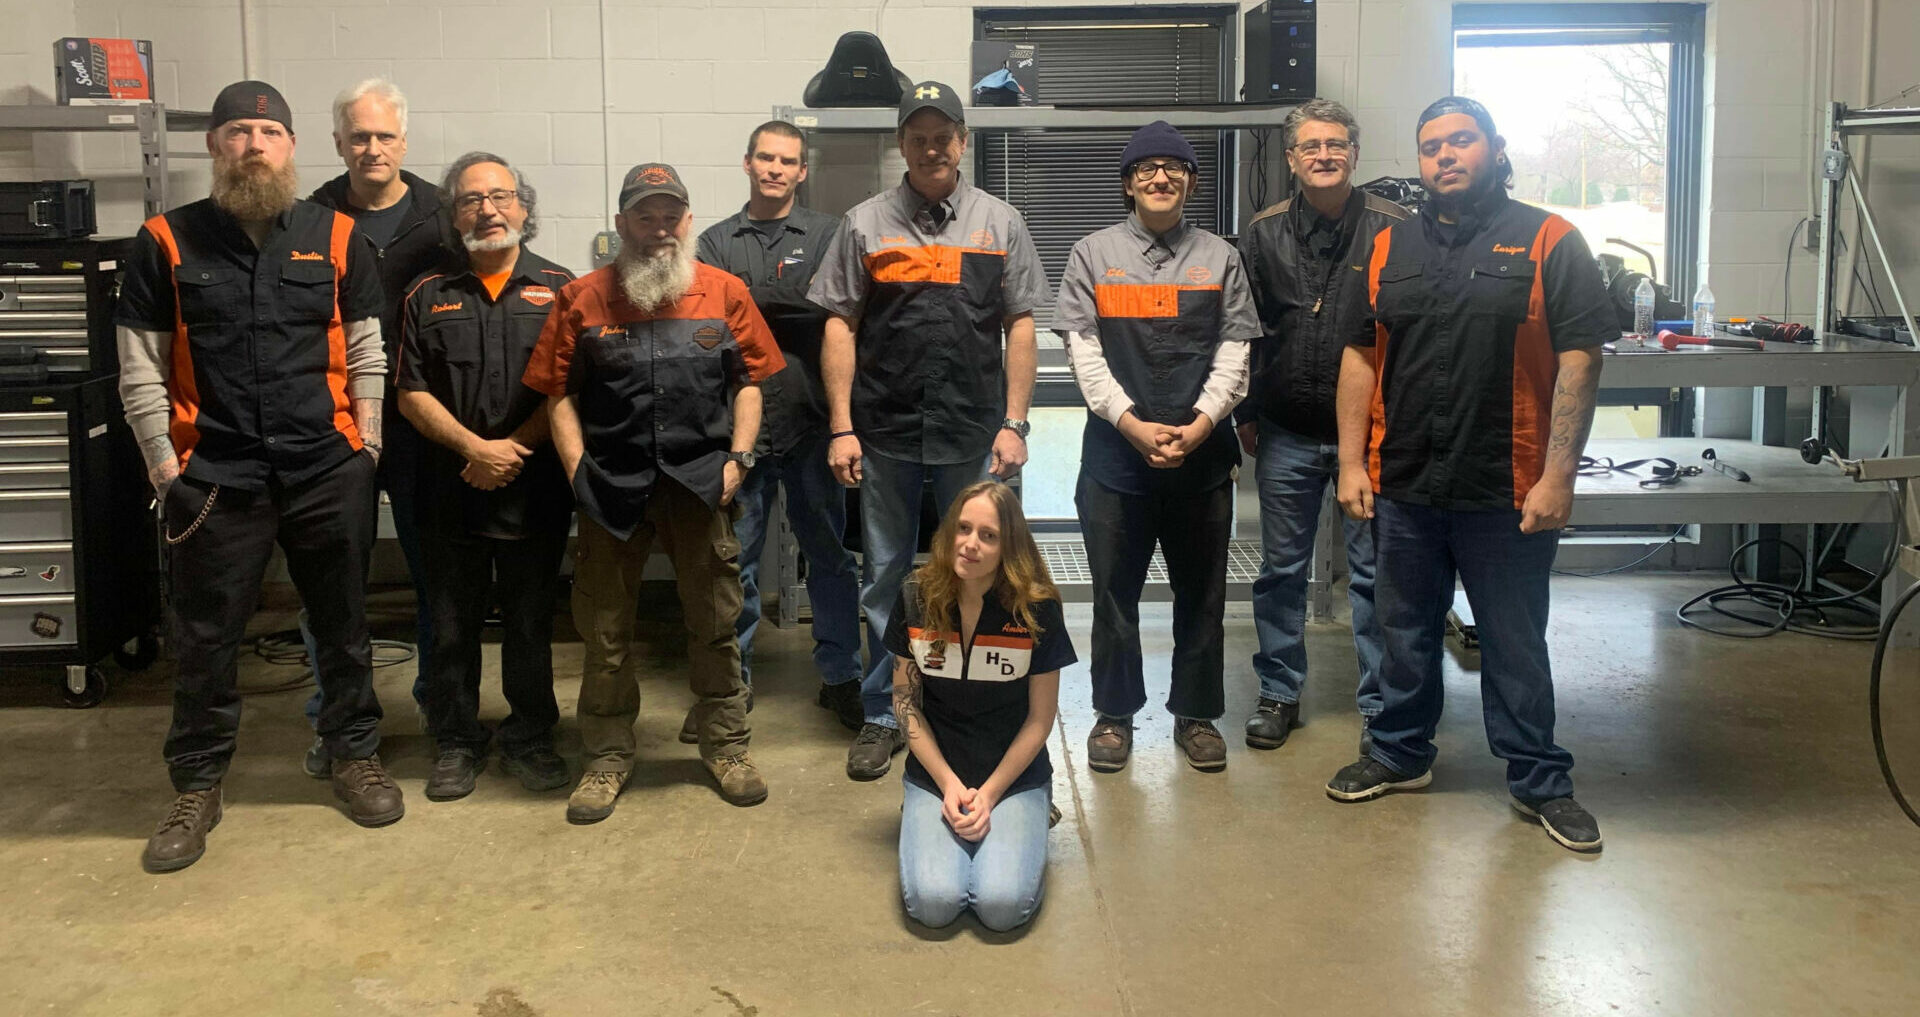 The first graduating class from the Midwest Motorcycle Mechanic School. Photo courtesy Midwest Motorcycle Mechanic School.